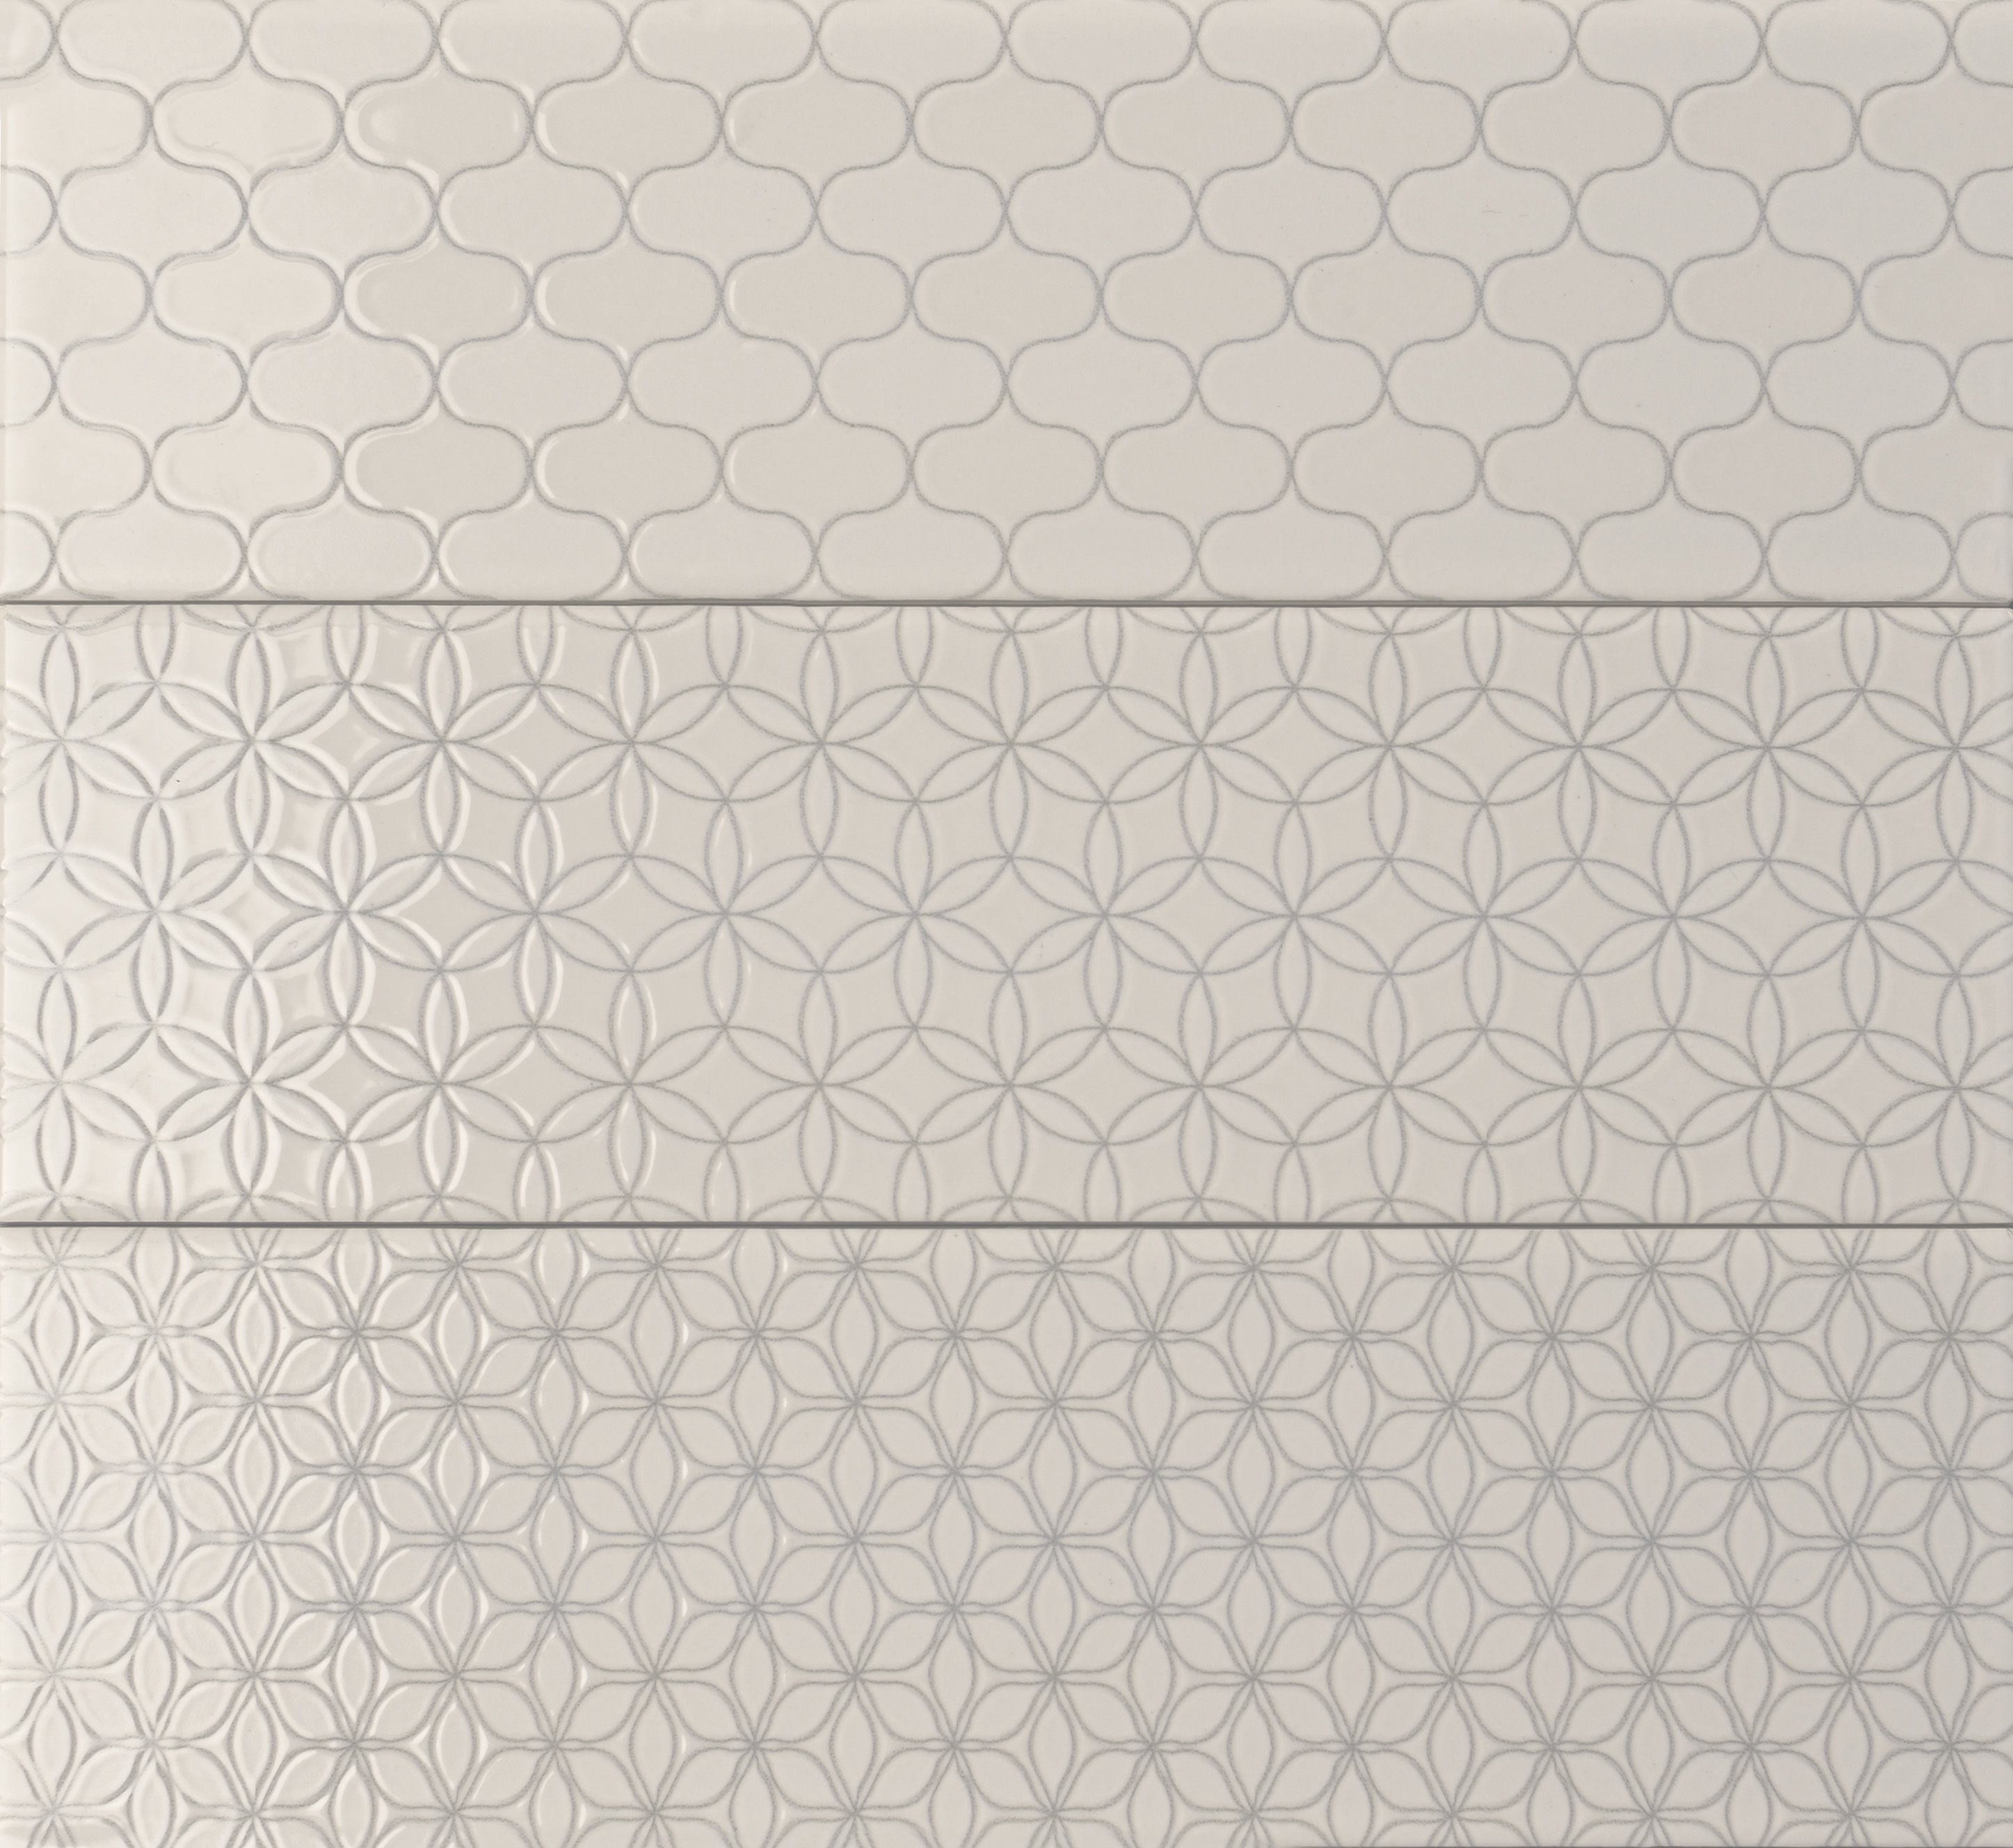 Tangier Ivory Gloss Patterned Ceramic Wall Tile, Pack of 54, (L)245mm (W)75mm